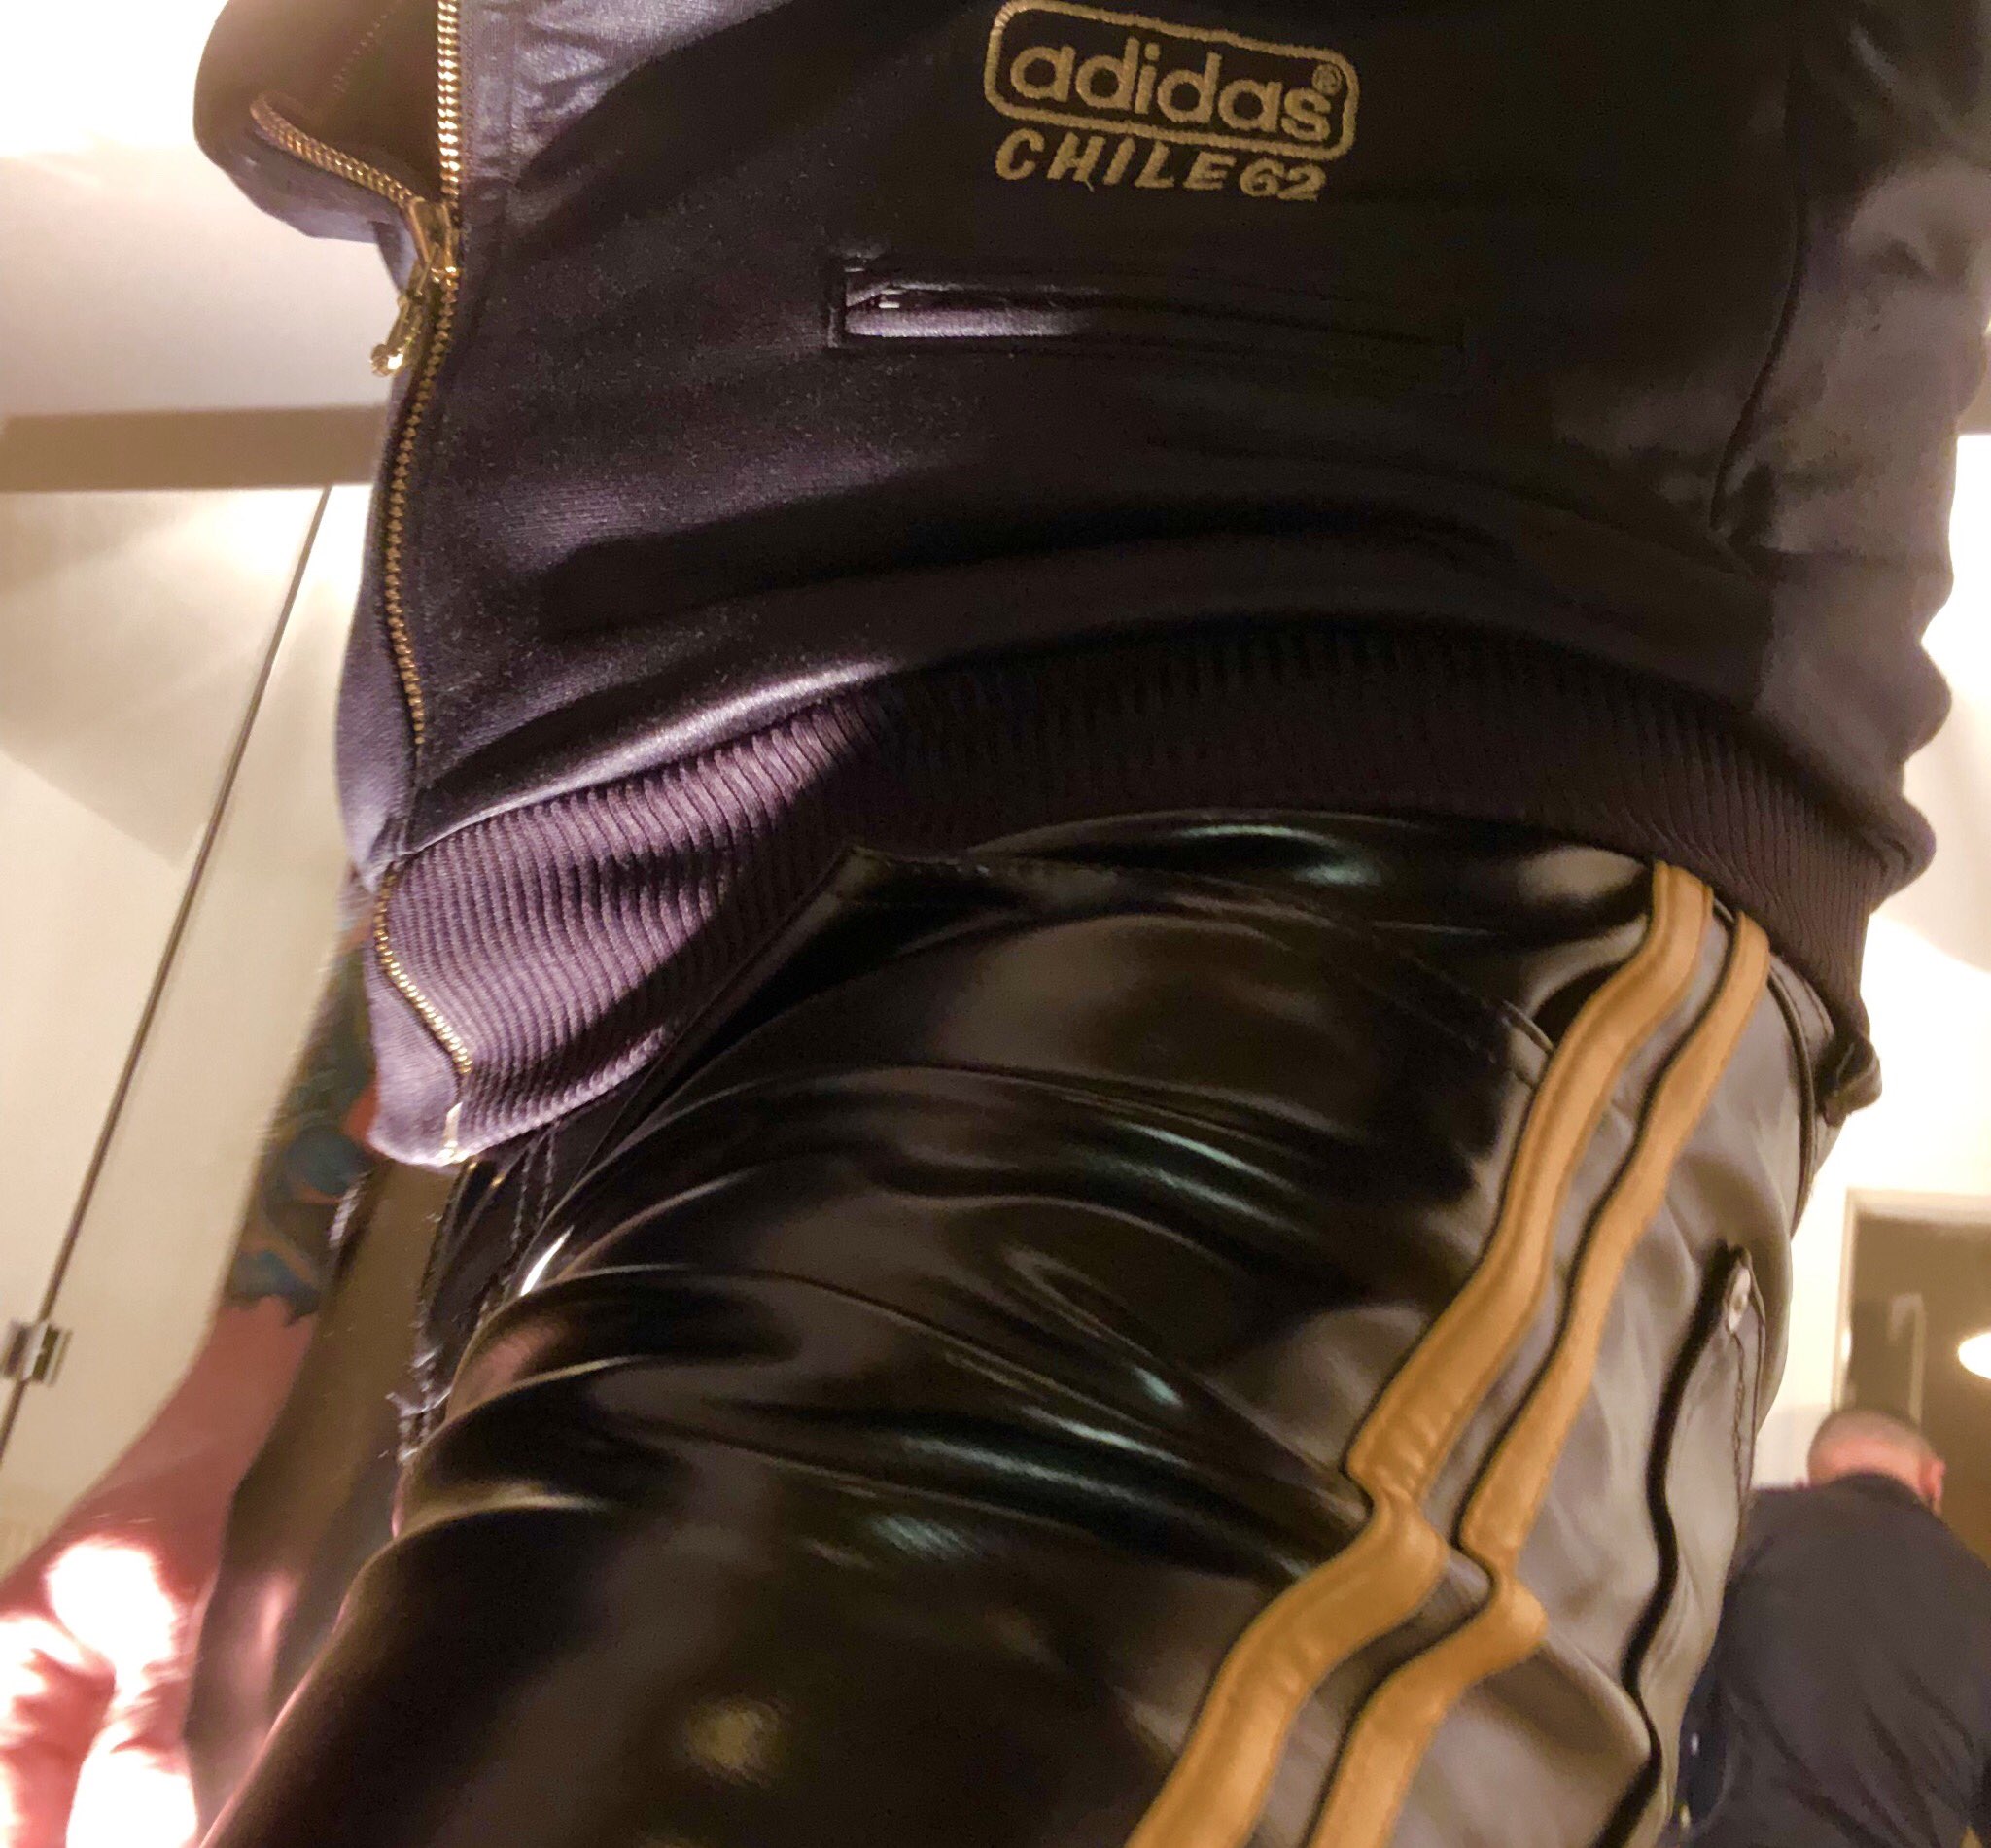 rubbermarques2007 on Twitter: "#adidas #adidaschile #chav #gay #gayfetish #sket New Adidas Chile from ebay. Let's check it out 😍 https://t.co/U9oyNE16hL" / Twitter